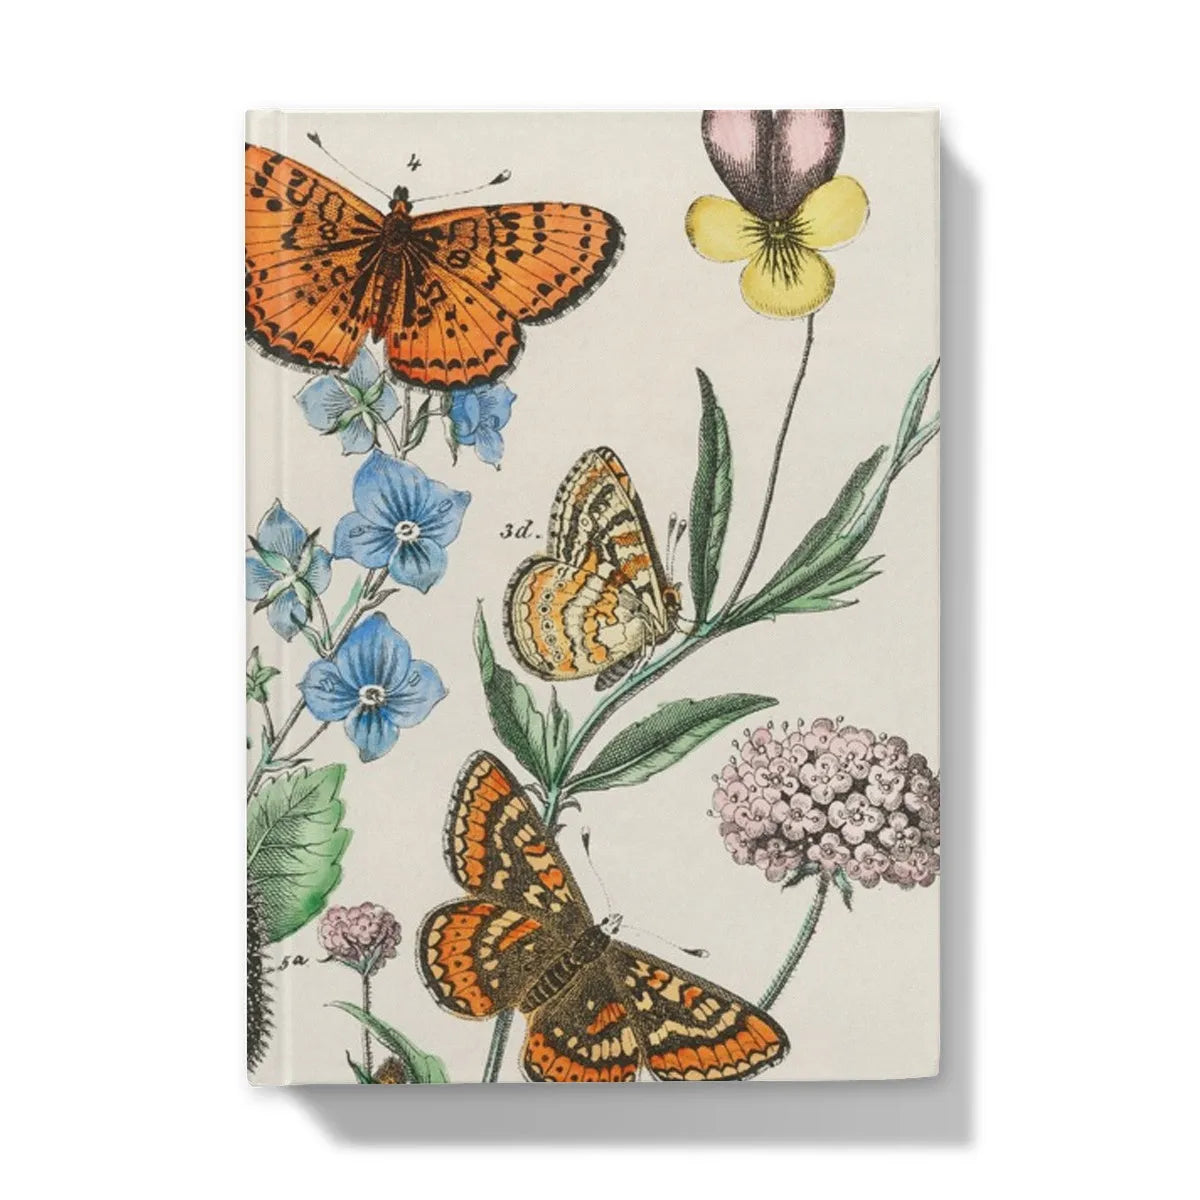 European Butterflies And Moths 2 By William Forsell Kirby Hardback Journal - 5’x7’ / Lined - Notebooks & Notepads